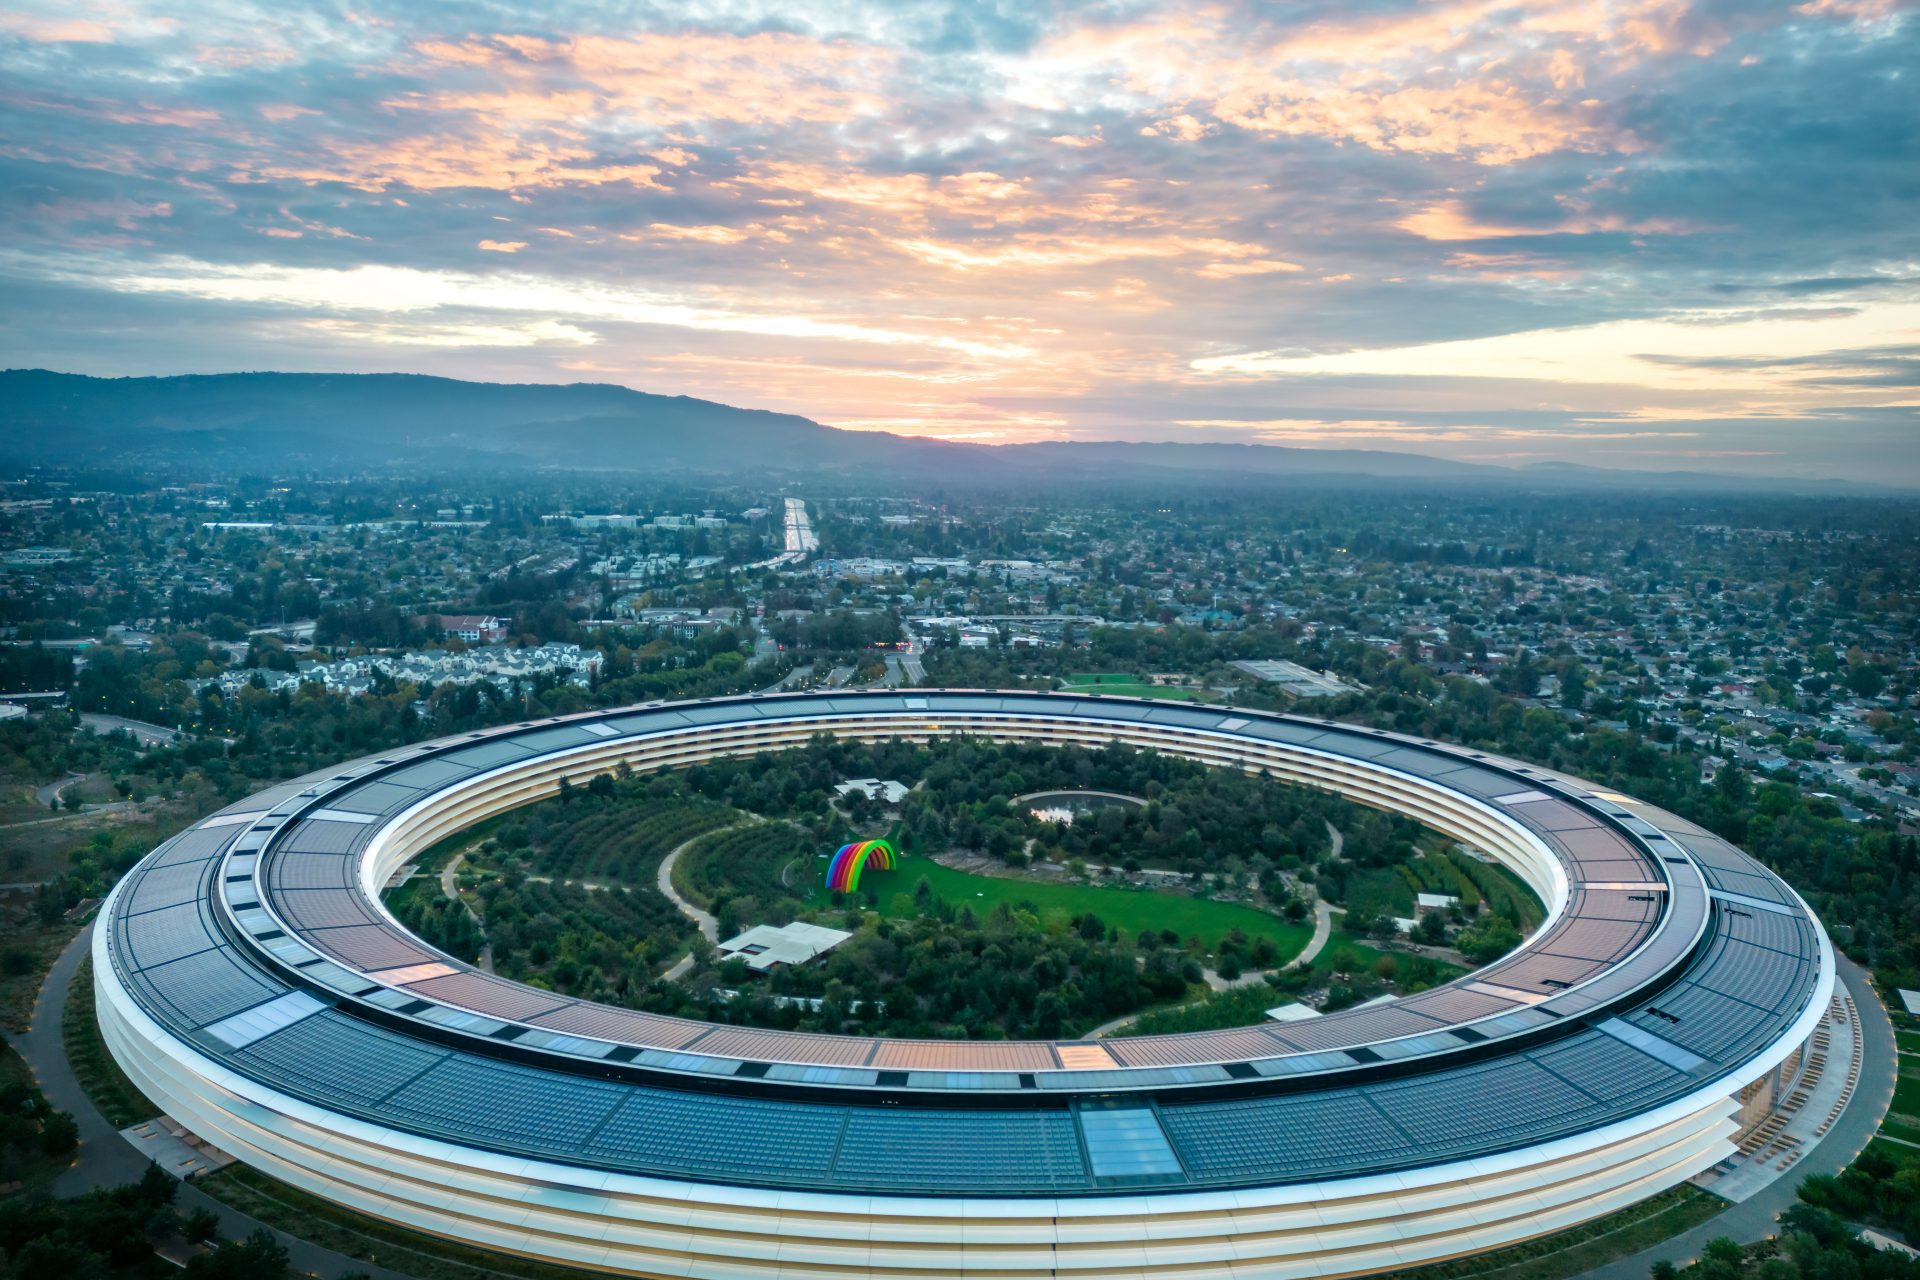 <p>Another good example of biophilic design can be found in the popular Apple Park, located in Santa Clara County, California. This complex has a structure that imitates the natural curves of nature and brings light to offices from all angles. The campus is surrounded by a new forest.</p> <p>Photo: Zetong Li/Pexels</p>